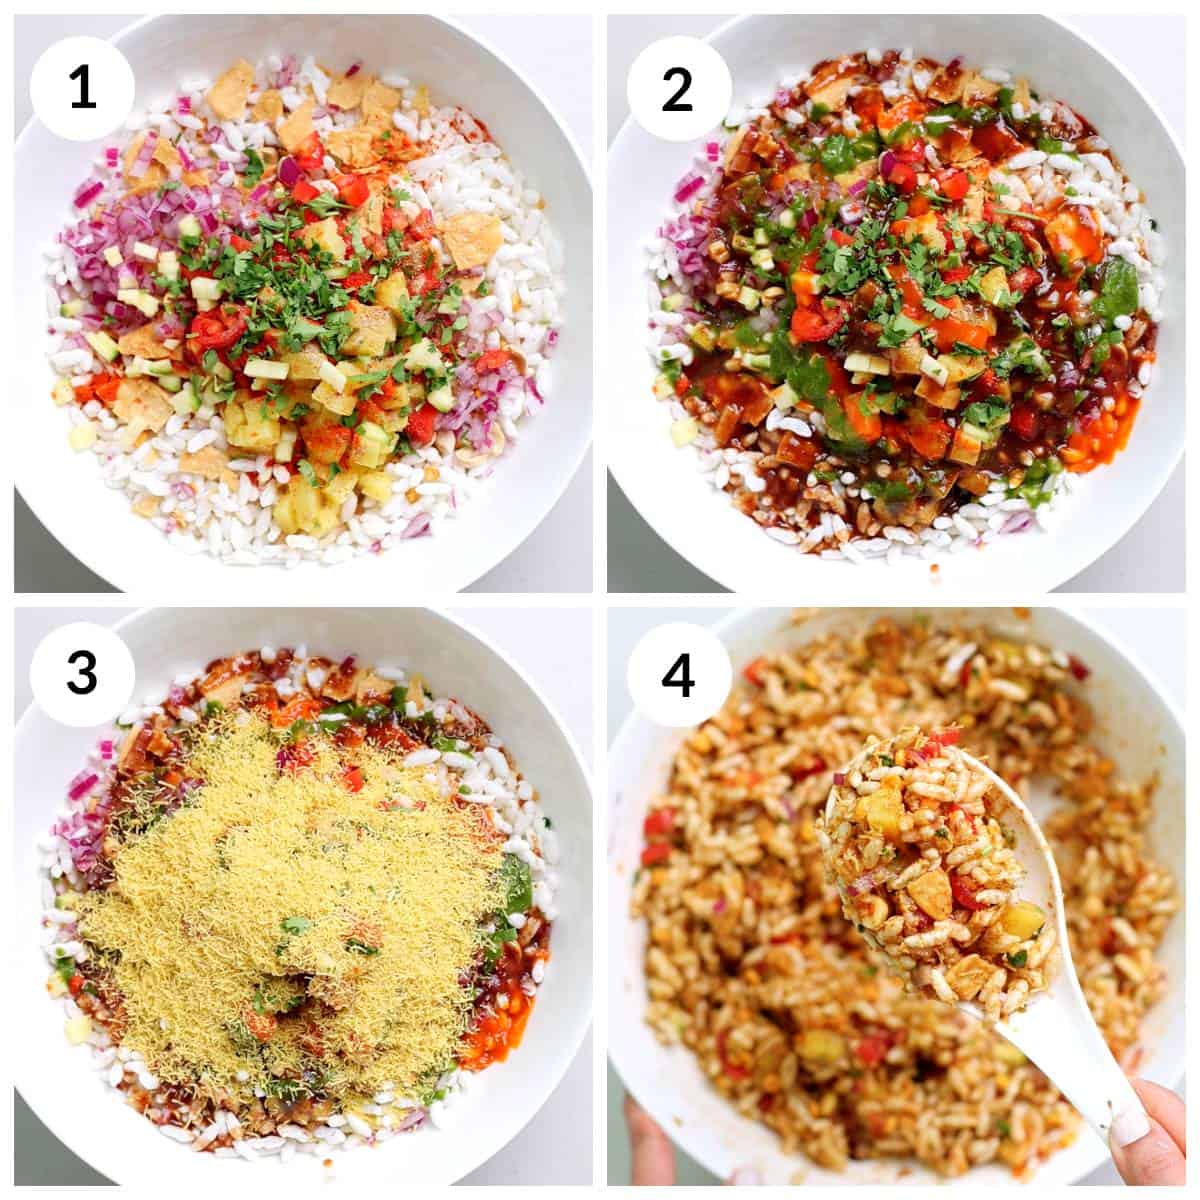 steps for making bhel puri by mixing all the ingredients and three chutneys together